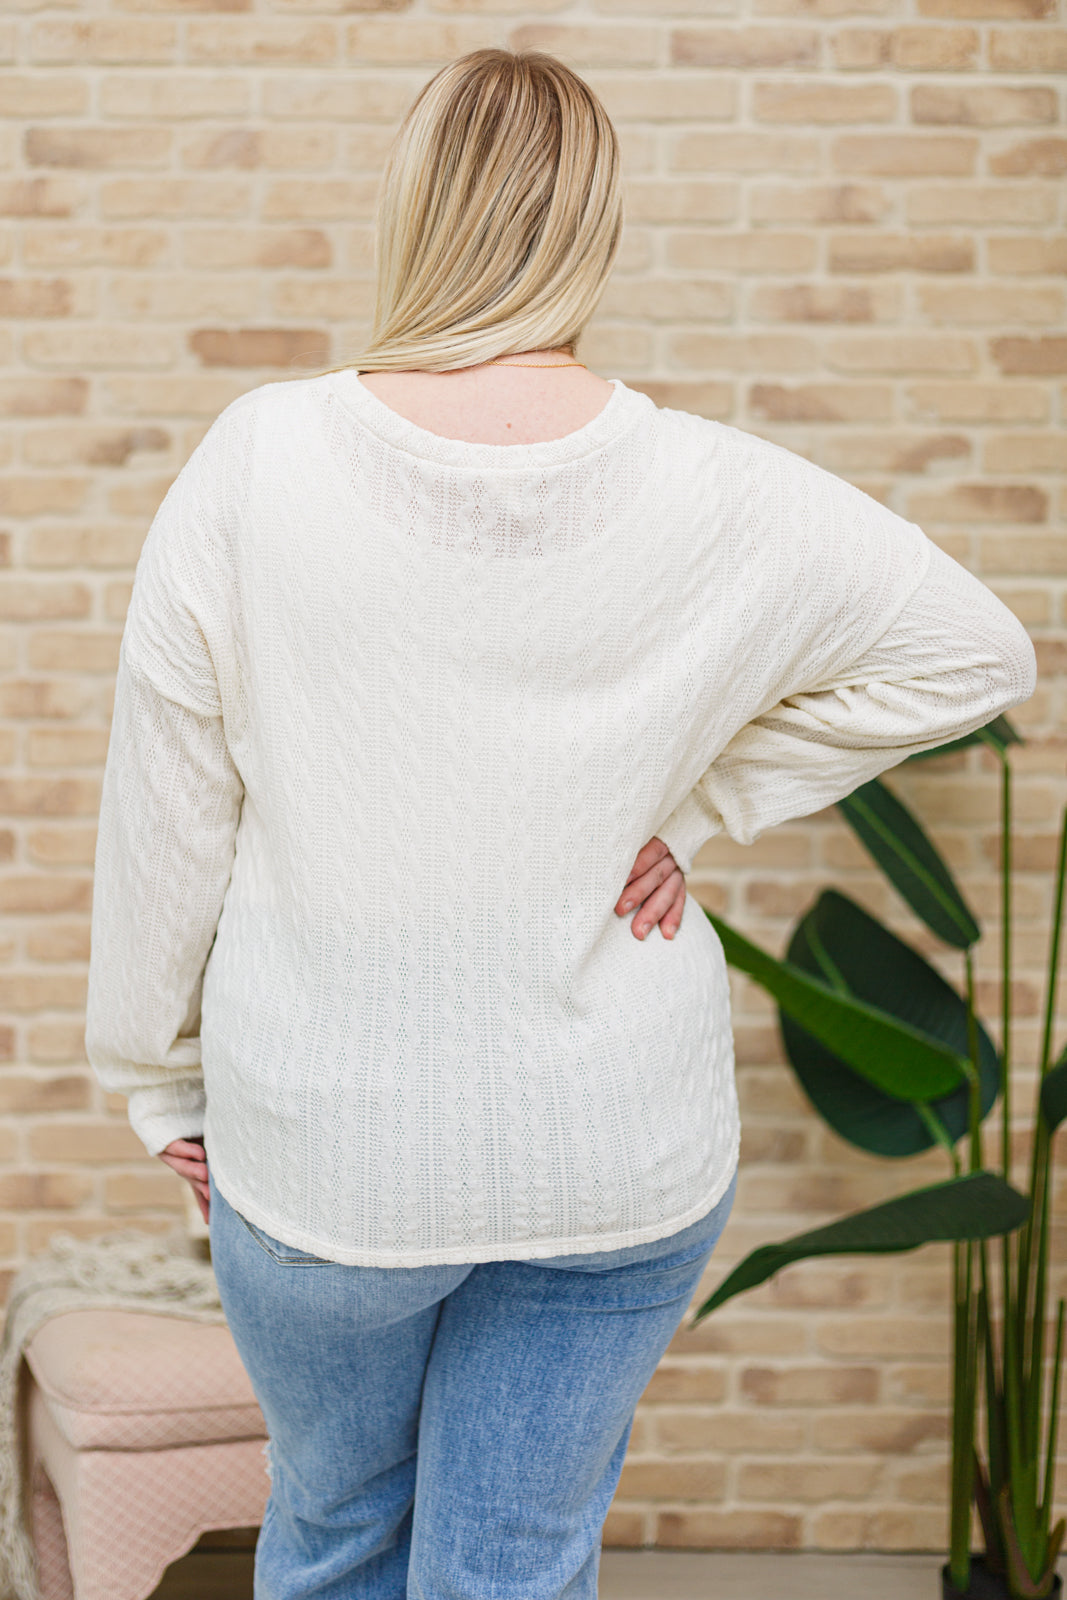 Keep Me Here Knit Sweater in Cream - 2/7/2023